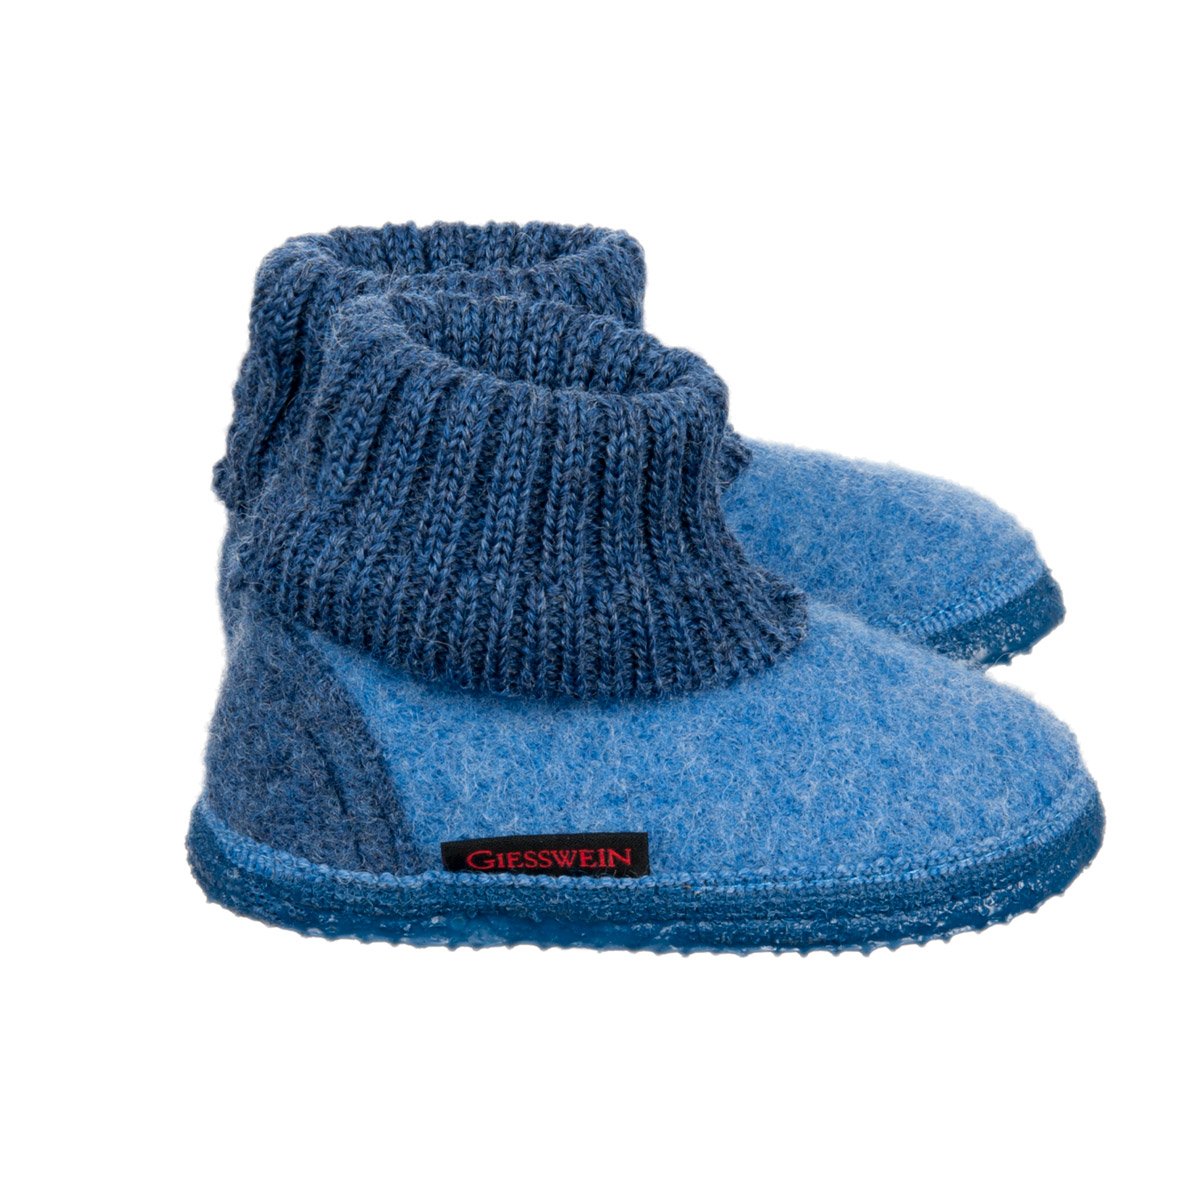 Giesswein slippers for children and 